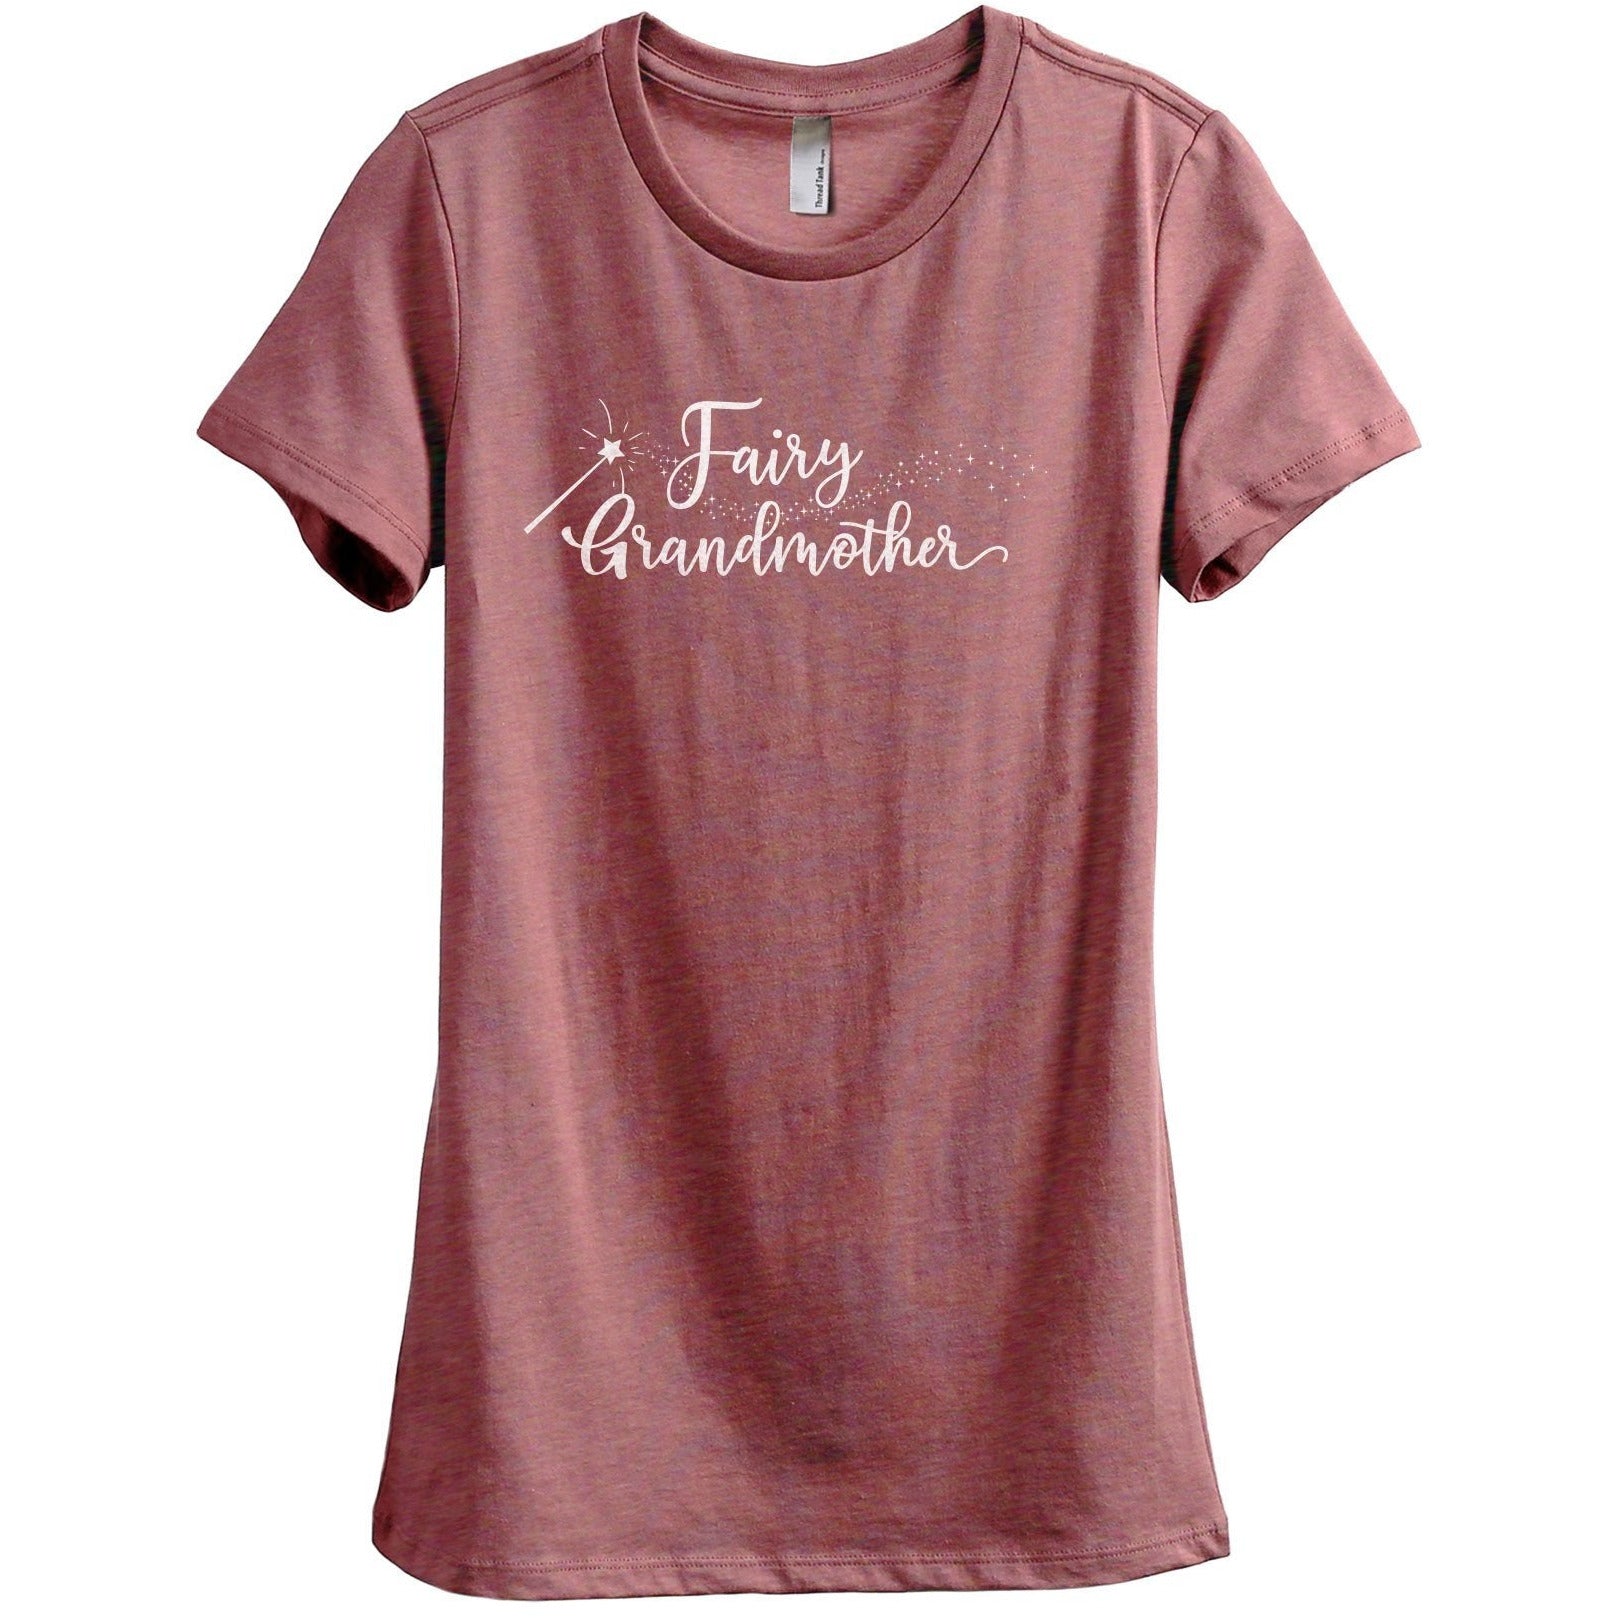 Fairy Grandmother Women's Relaxed Crewneck T-Shirt Top Tee Heather Rouge